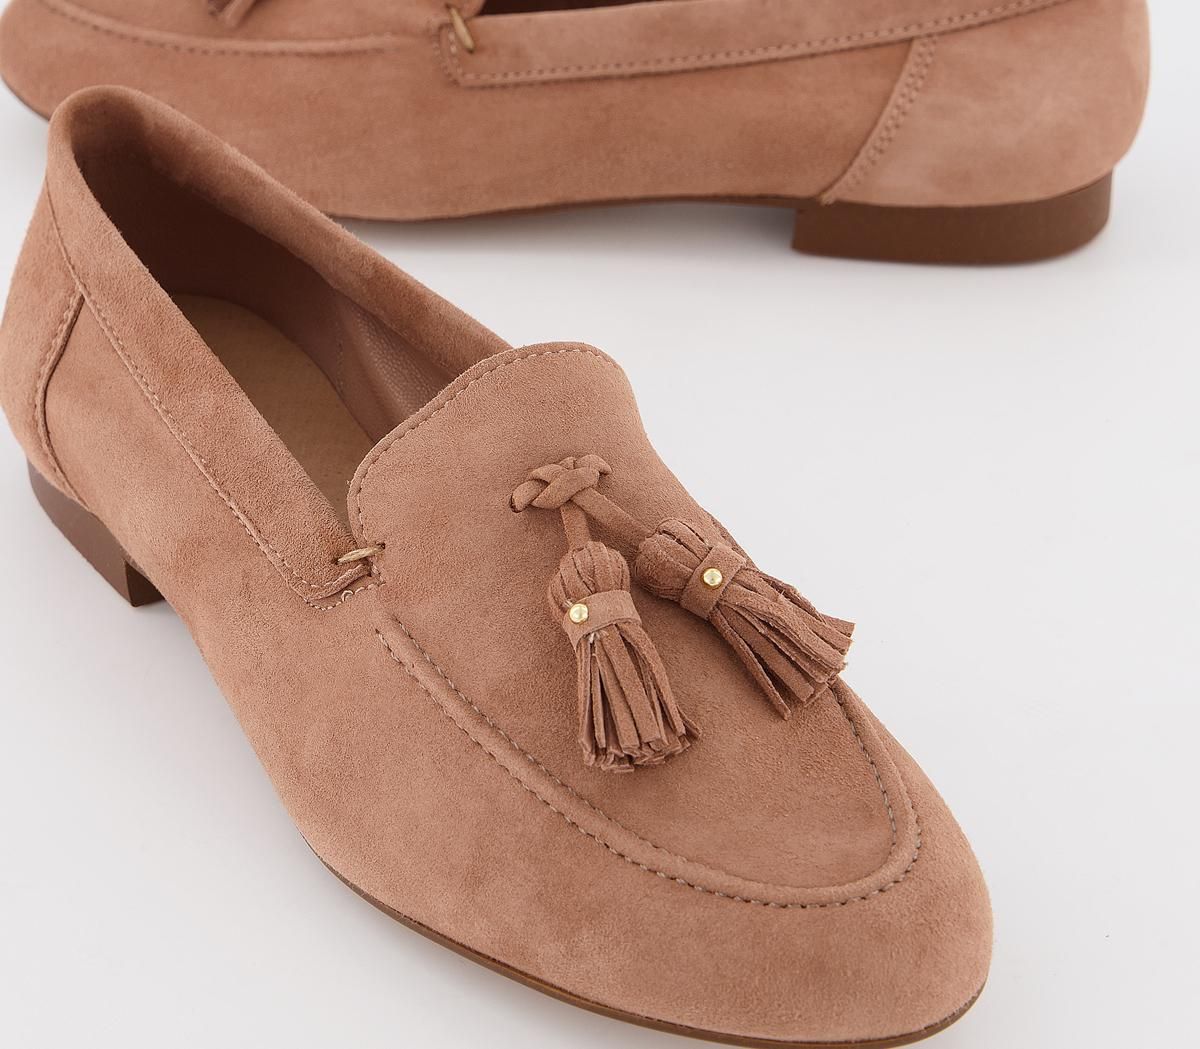 Office Retro Tassel Loafers New Nude Suede - Flat Shoes for Women | OFFICE London (UK)